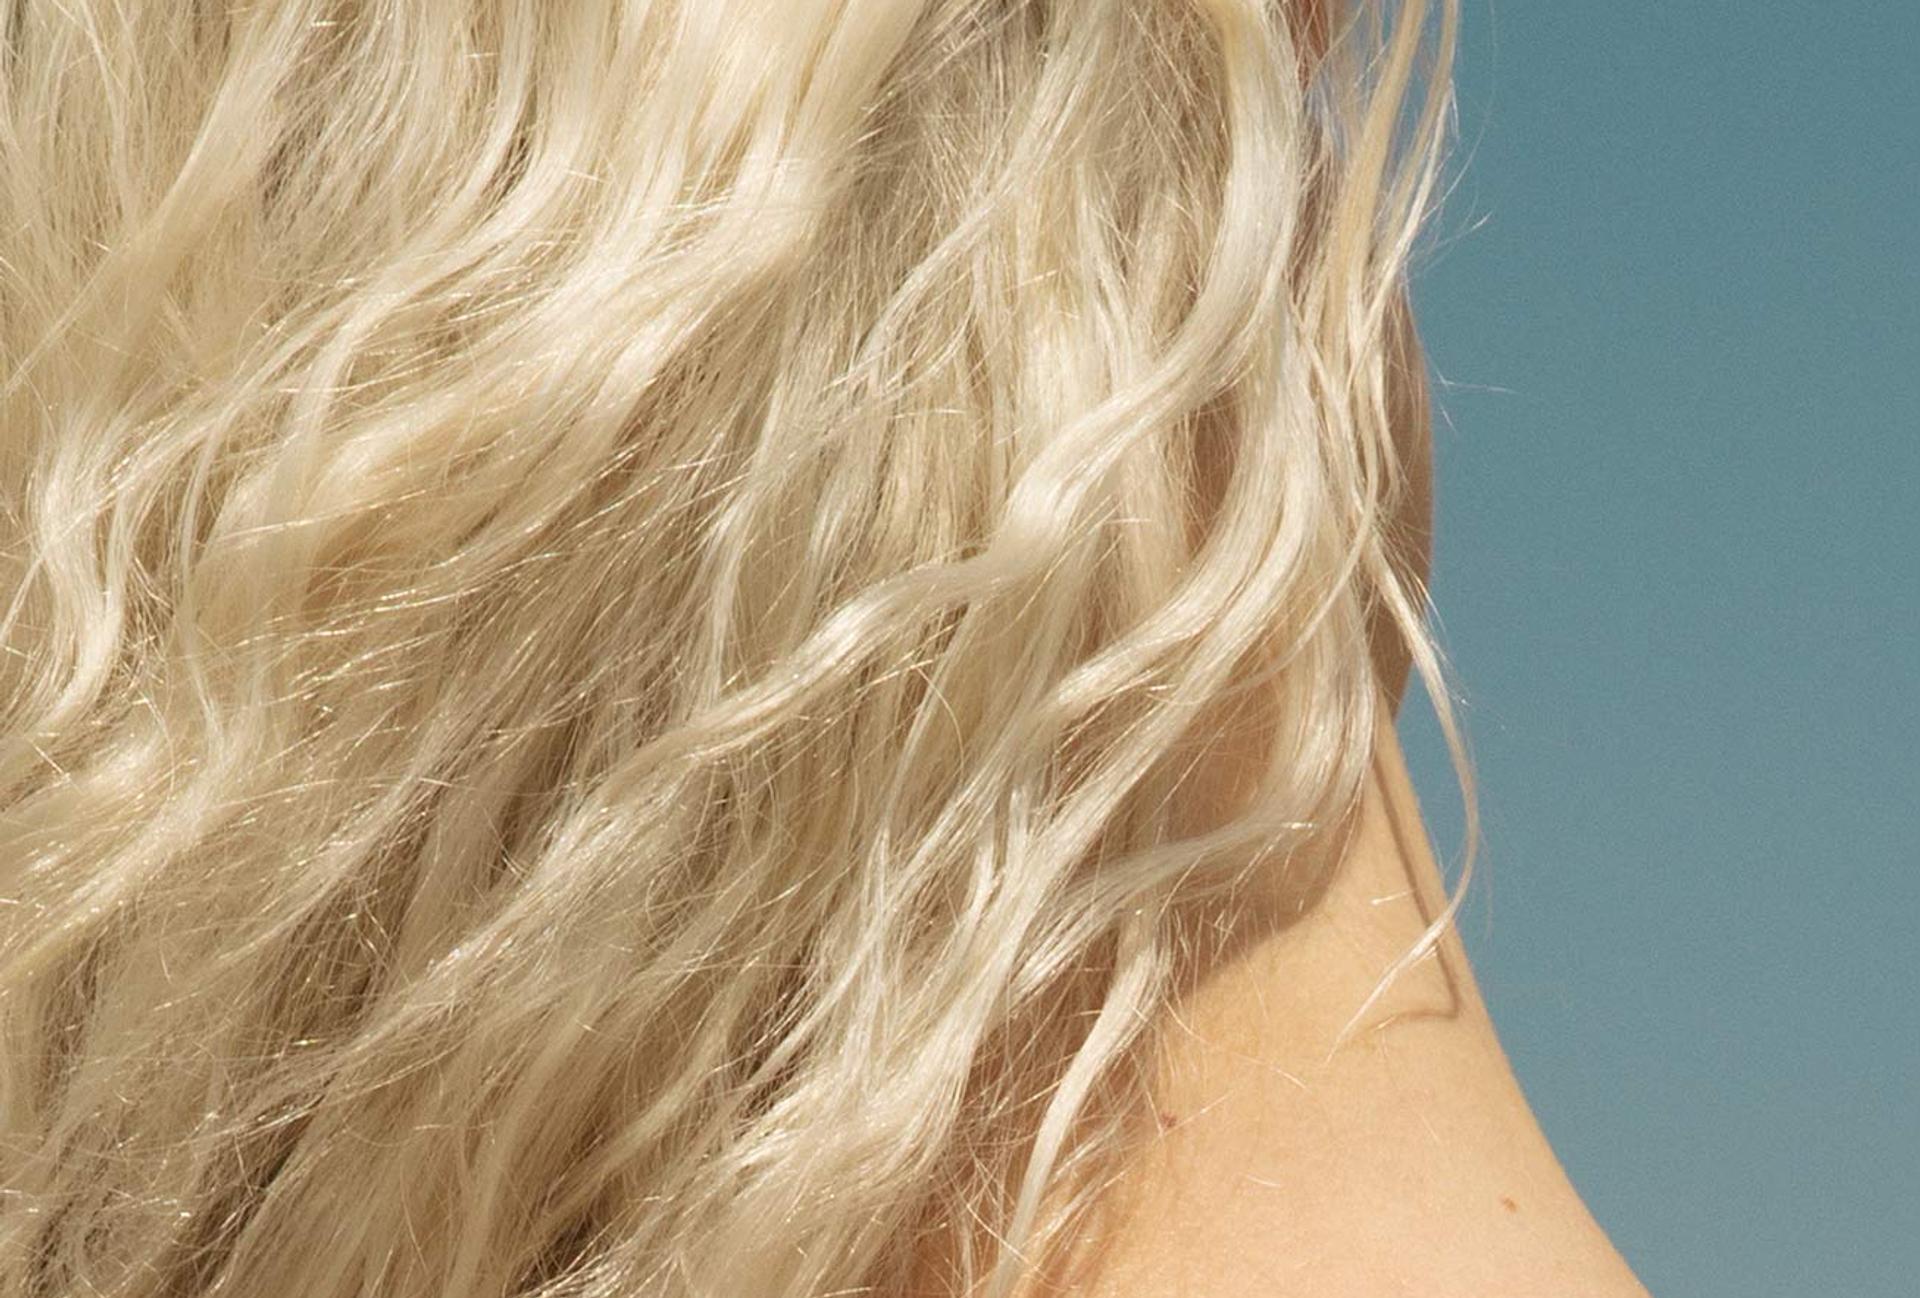 Image of the back of a model's head and neck showcasing blonde windswept frizzy hair with blue sky background